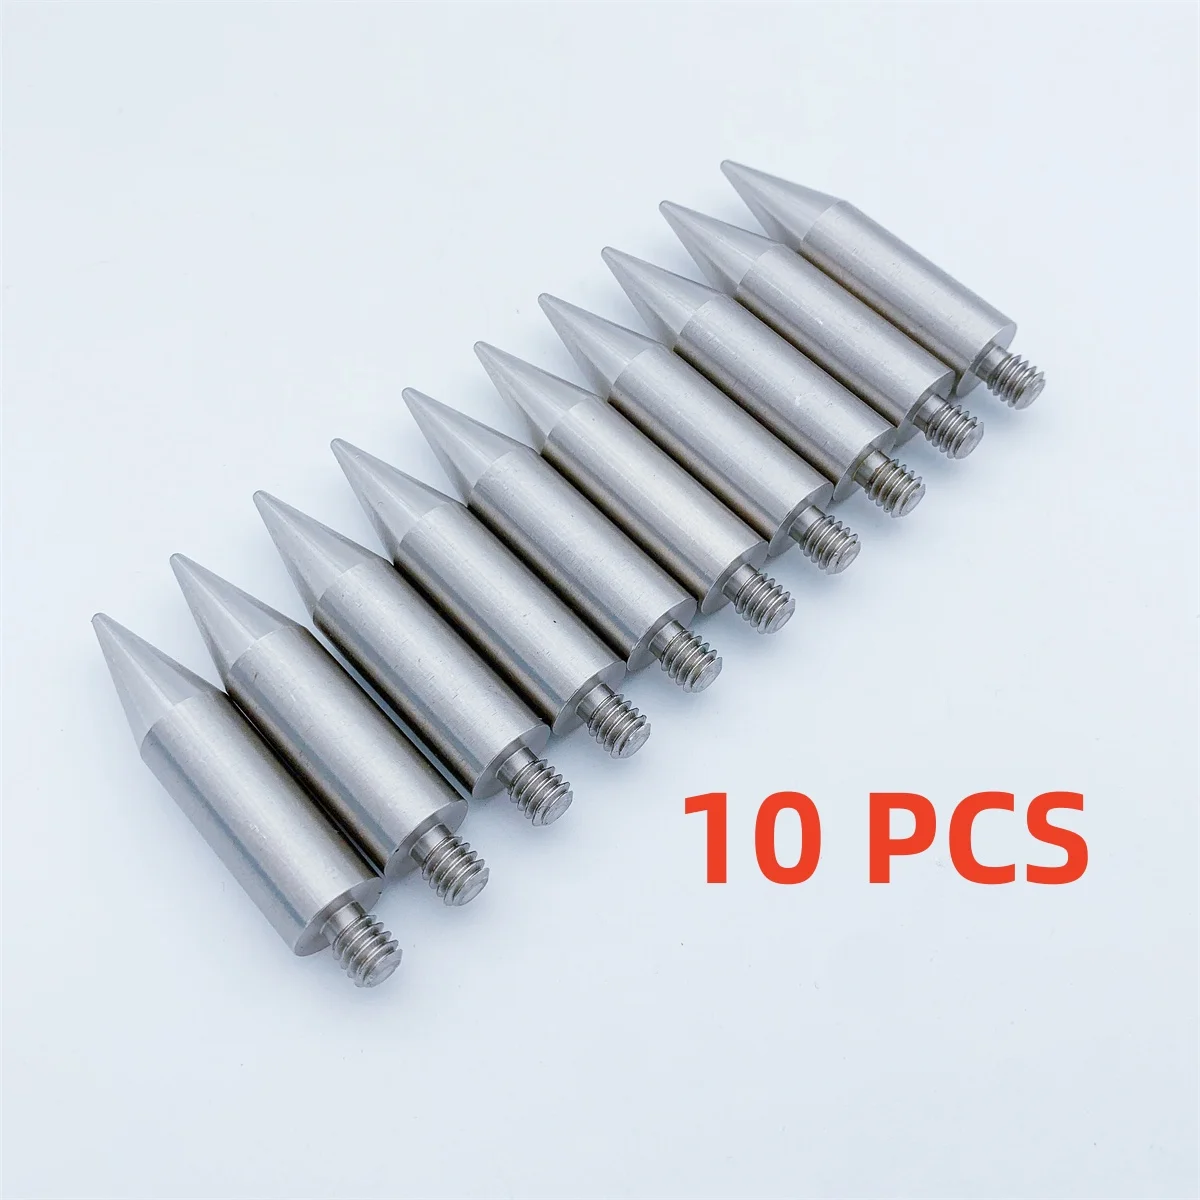 

10pcs Replacement Stainless Steel Prism mini Pole Point - 1/4" Thread length 50mm fits prism mini poles